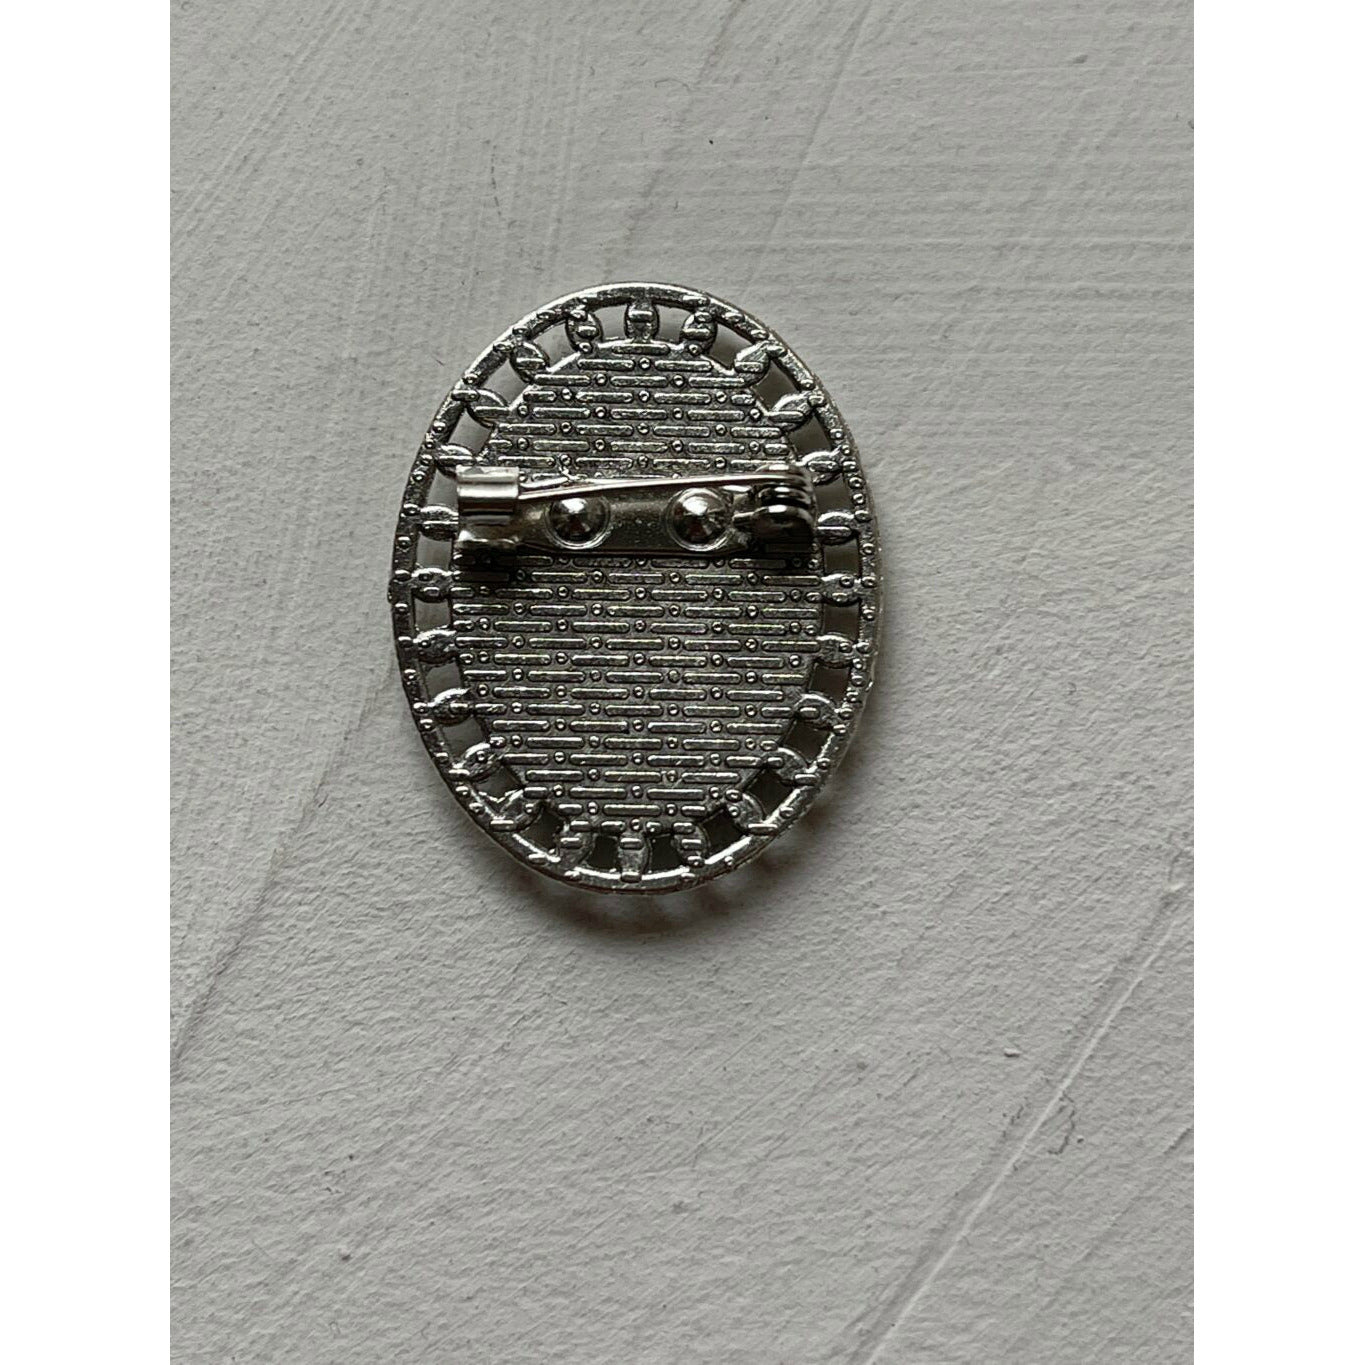 A memorial brooch or memorial pin in the design called Brogue, showing the back of the brooch. The pin back is shown against a neutral white textured background and is intended to be pinned to a wedding bouquet or wedding jacket to include a deceased relative on your wedding day.